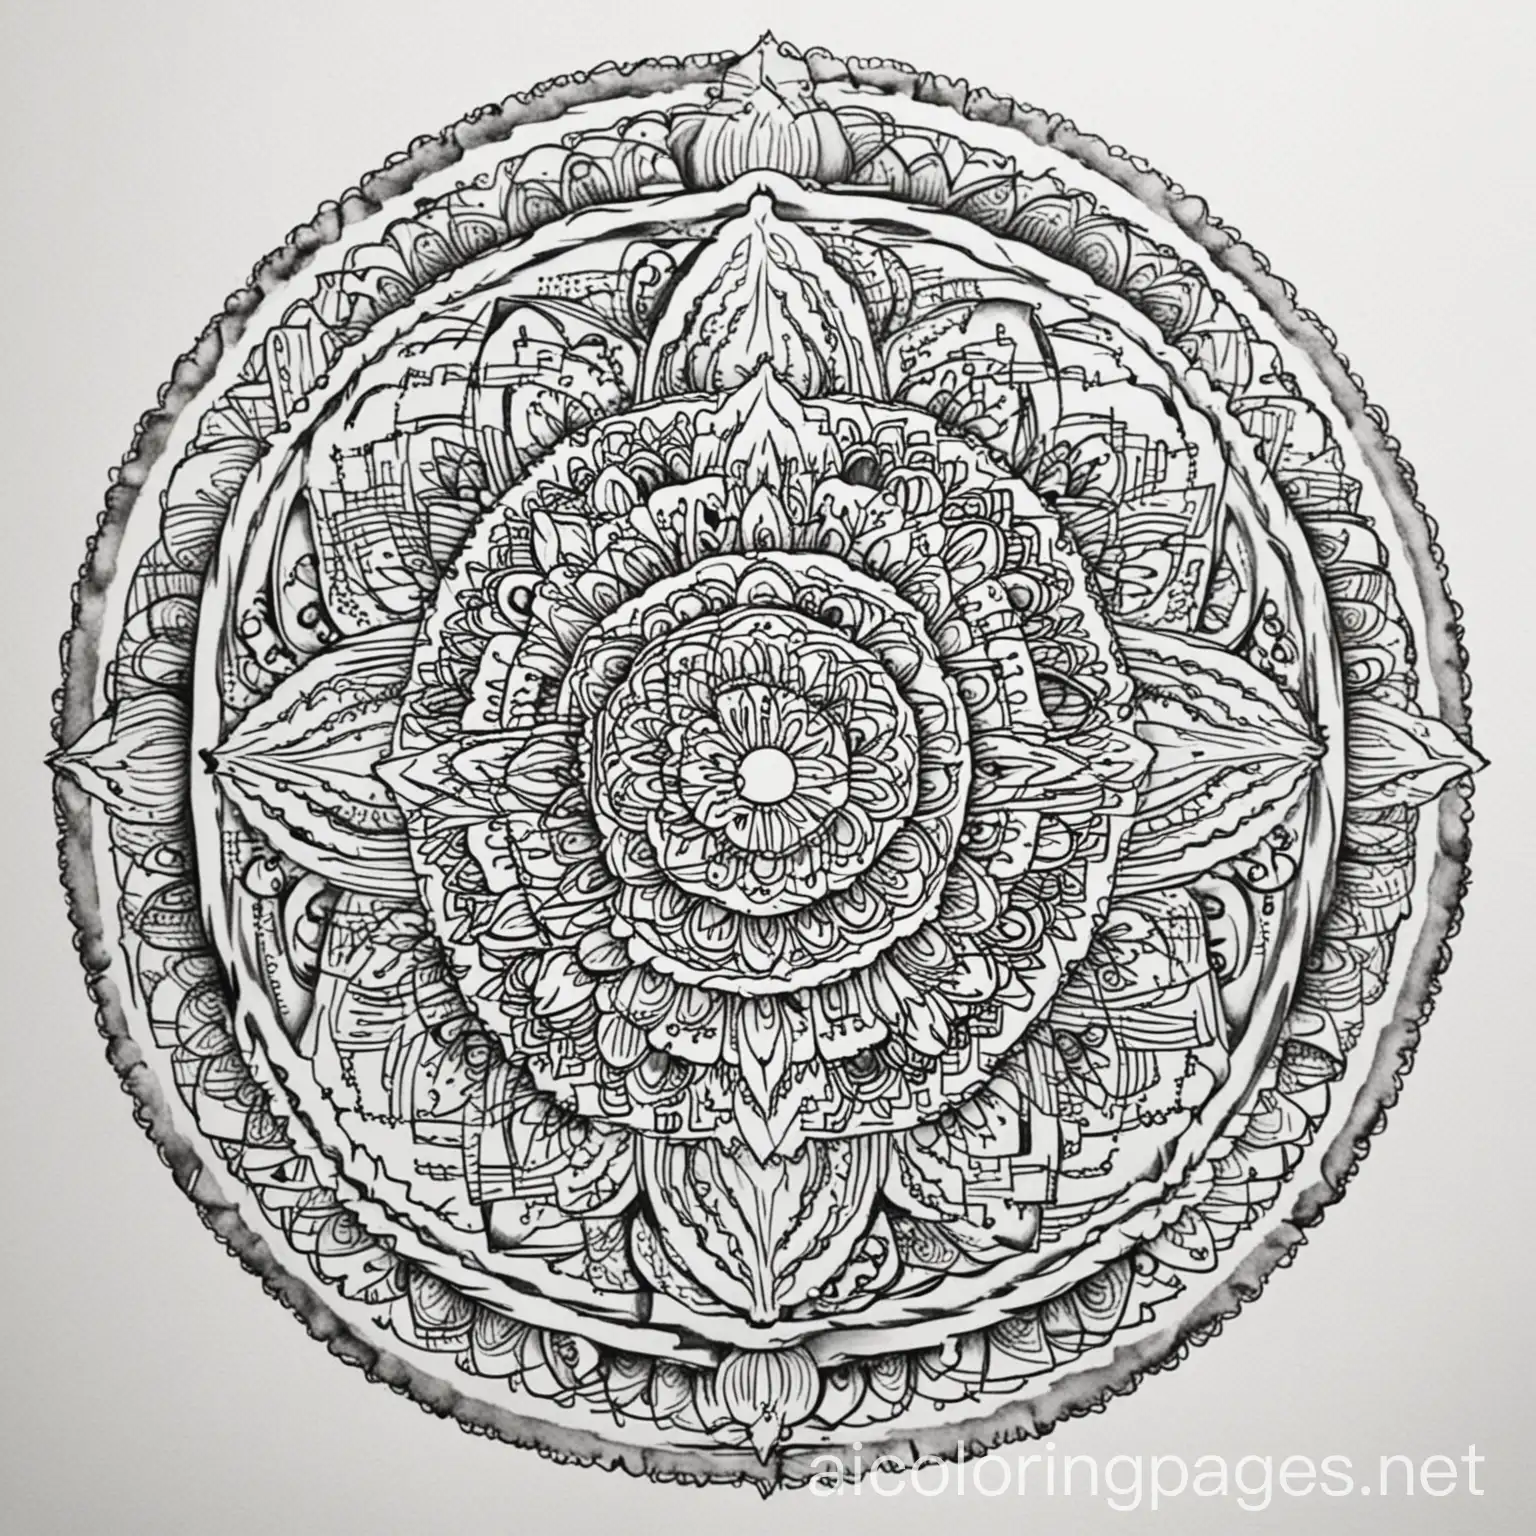 Mandala, Coloring Page, black and white, line art, white background, Simplicity, Ample White Space. The background of the coloring page is plain white to make it easy for young children to color within the lines. The outlines of all the subjects are easy to distinguish, making it simple for kids to color without too much difficulty